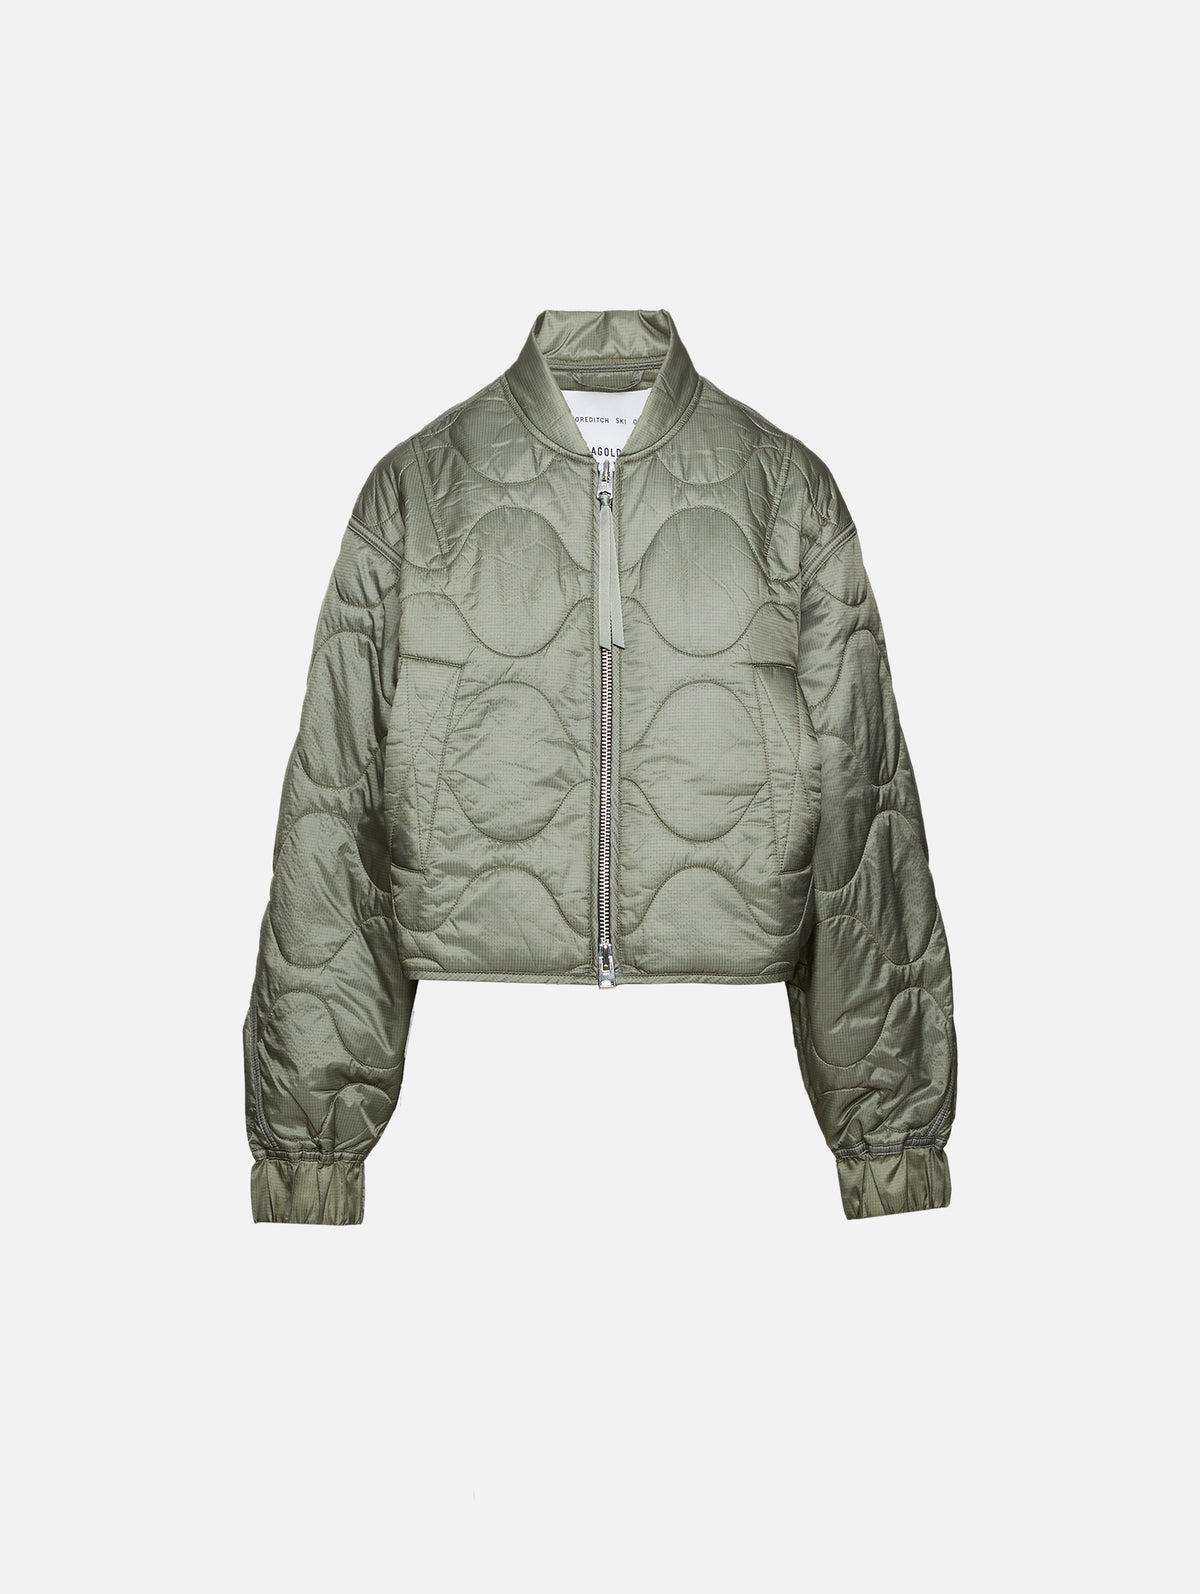 Shoreditch Ski Club x AGOLDE Iona Quilted Jacket in Laurel